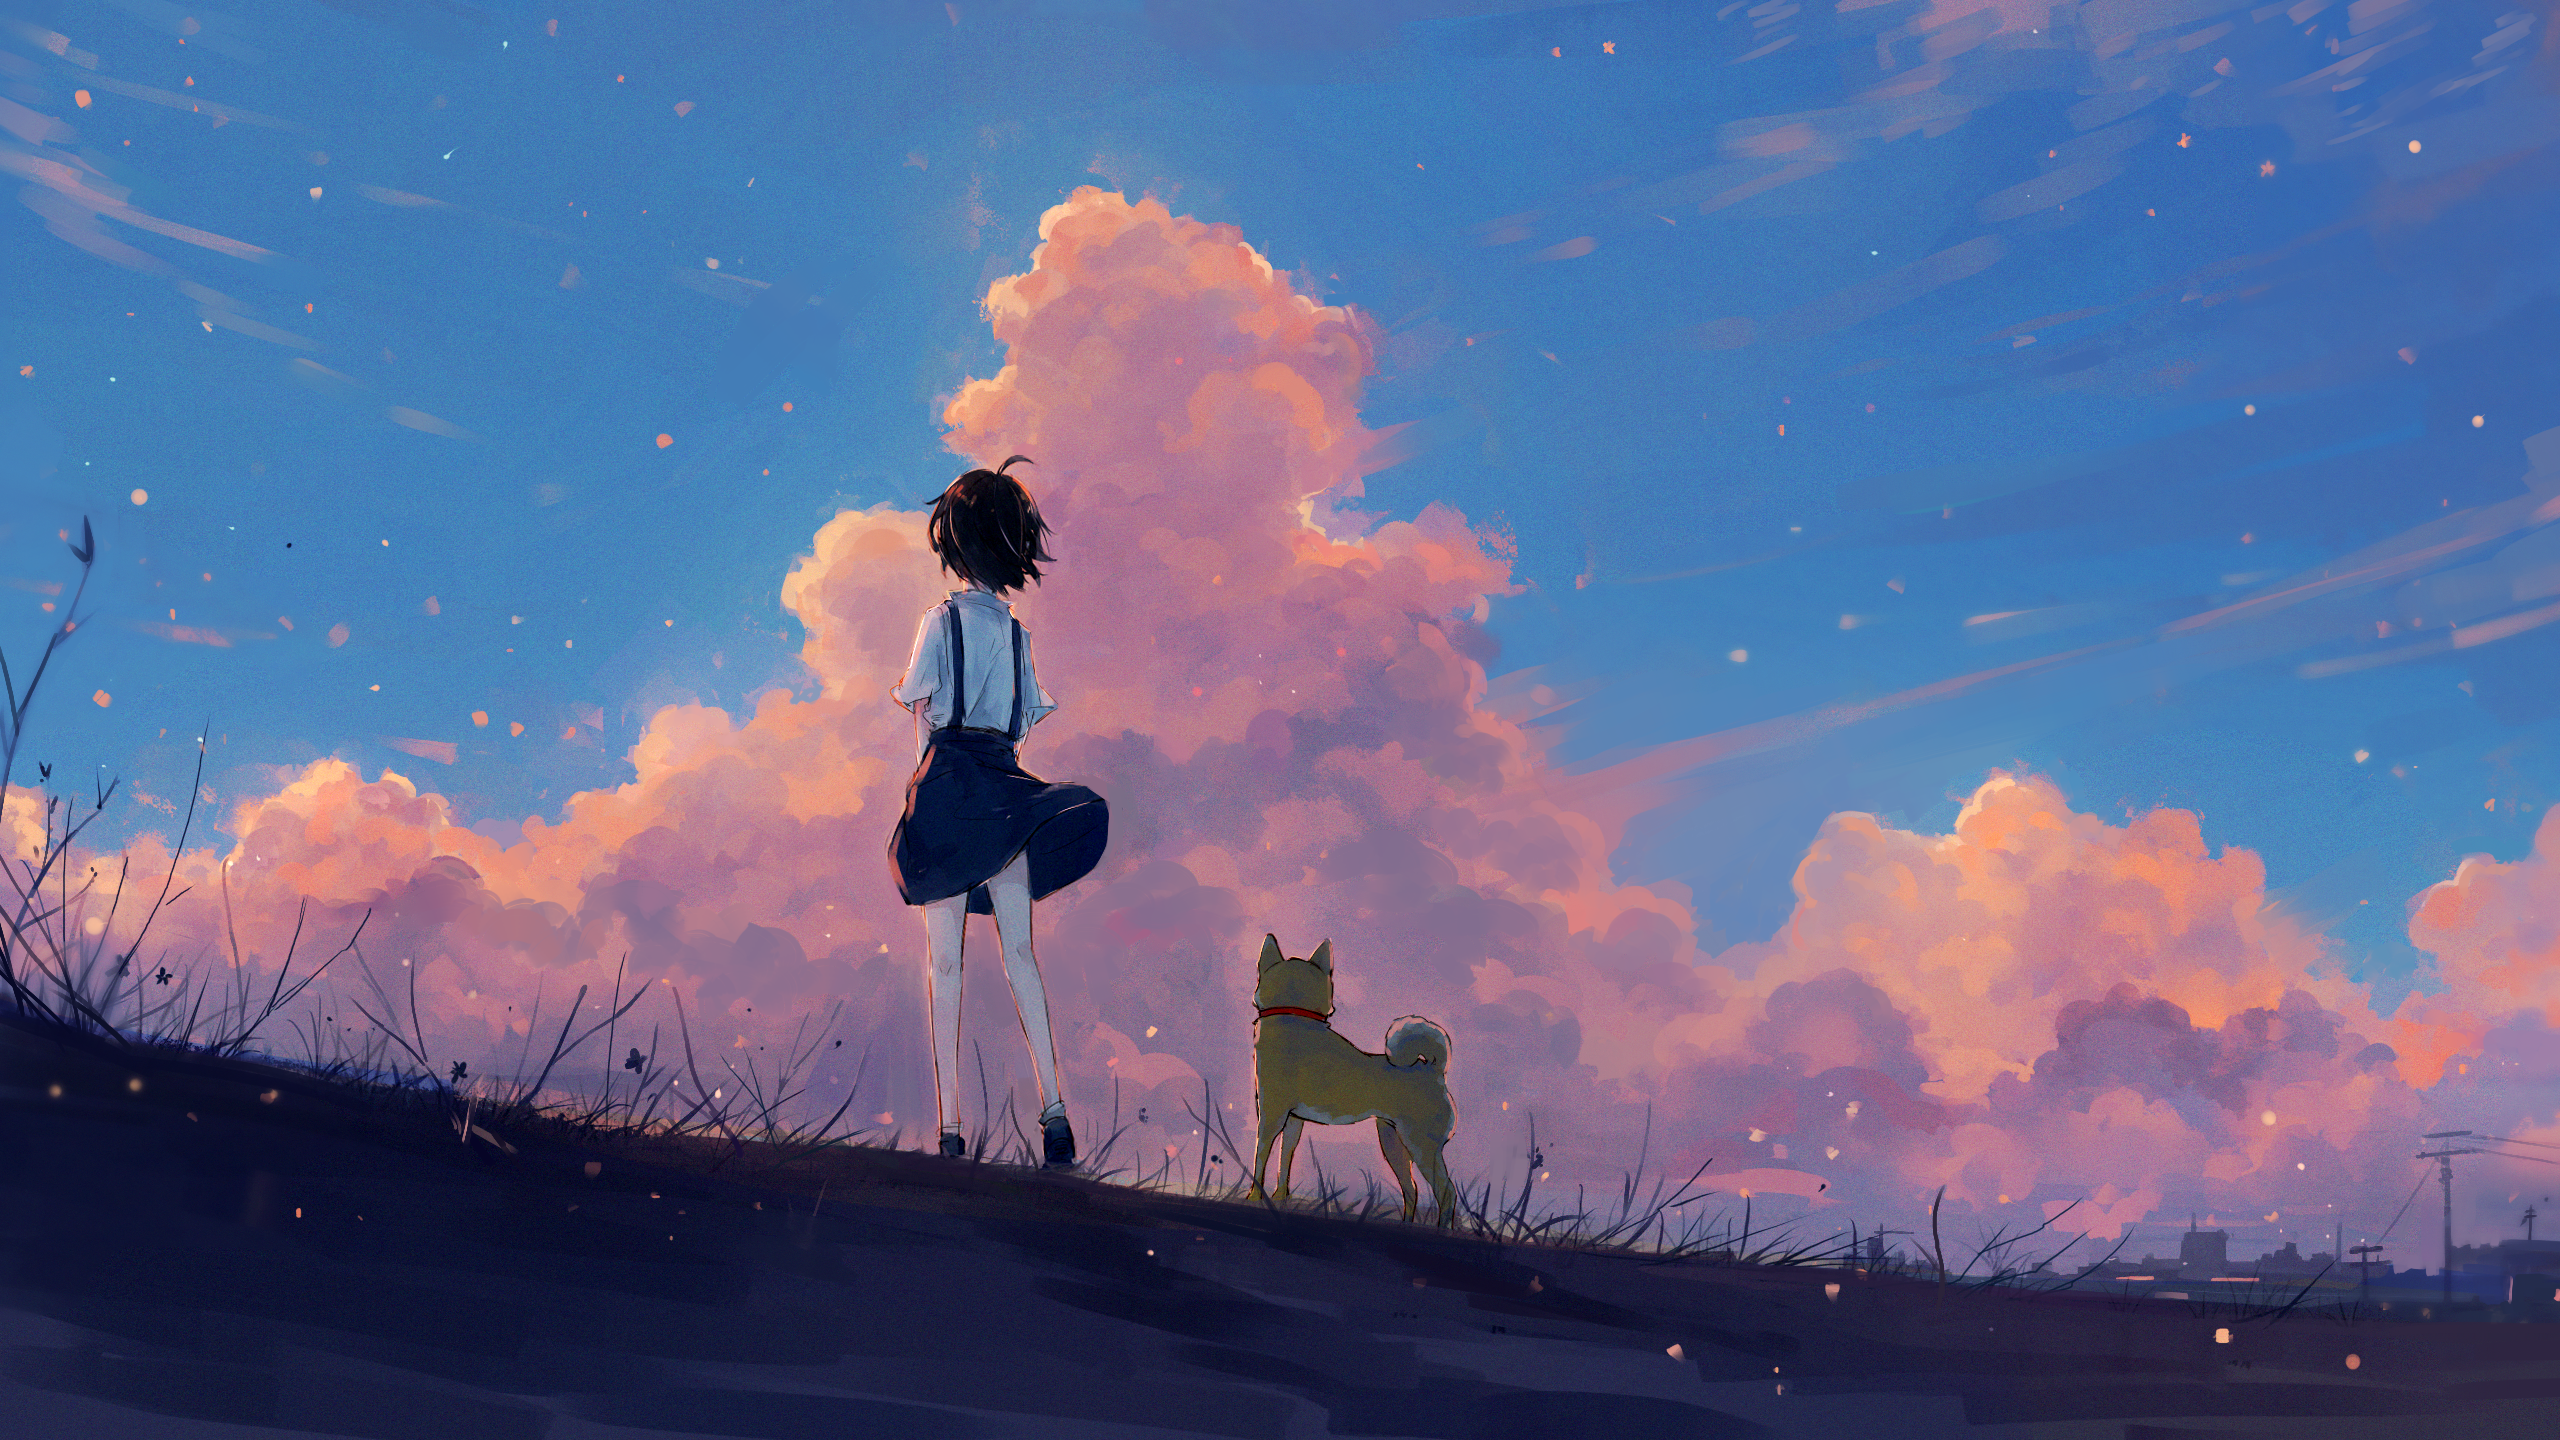 End Of The Summer [Axle] (cdn.awwni.me) Submitted By _Eltanin_ To R ImaginarySliceOfLife 1 C. Desktop Wallpaper Art, Landscape Wallpaper, Anime Scenery Wallpaper